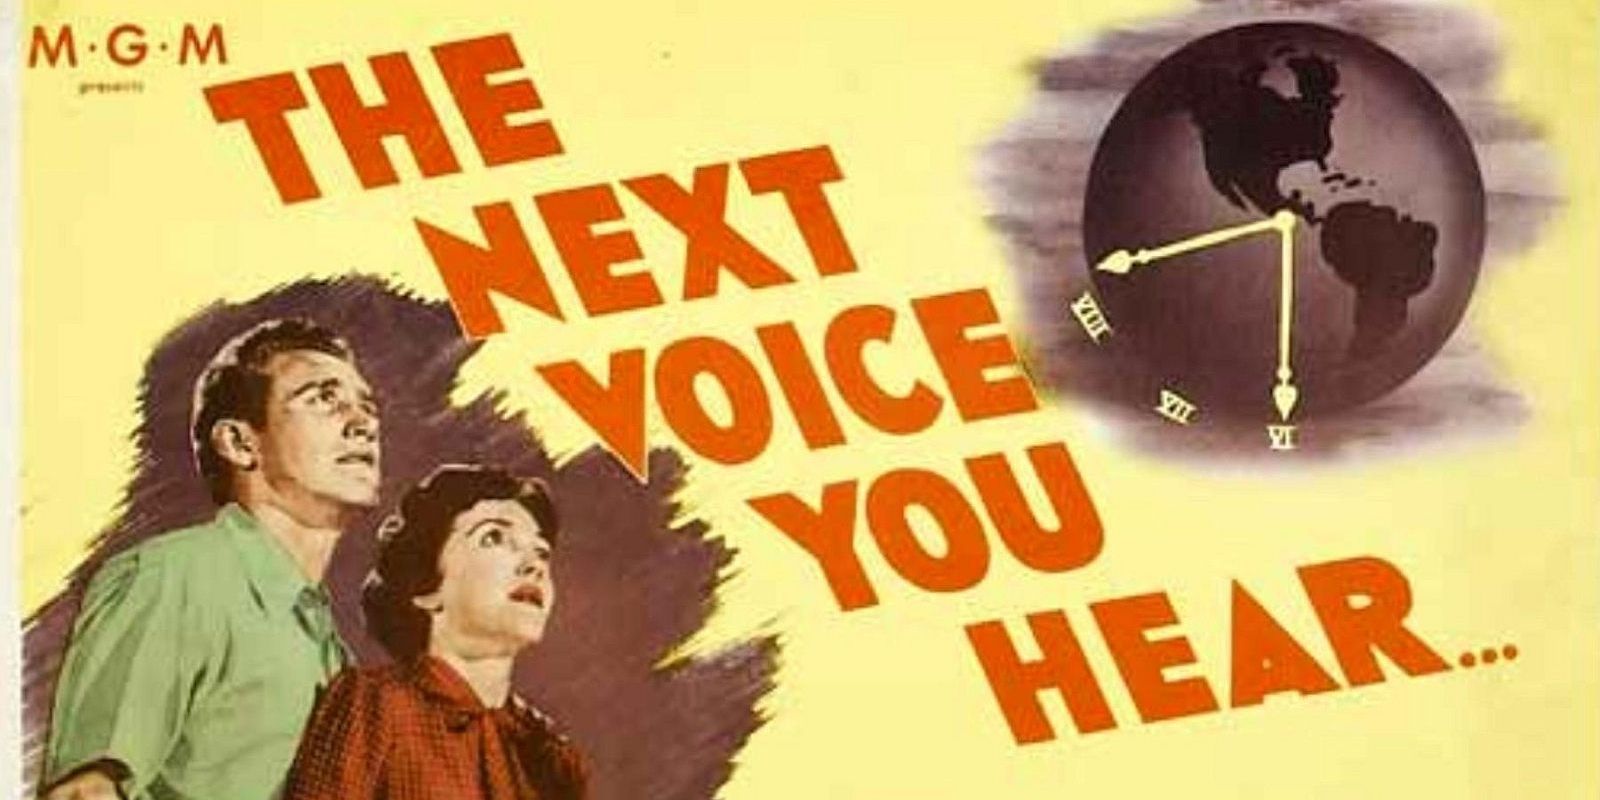 the next voice you hear poster